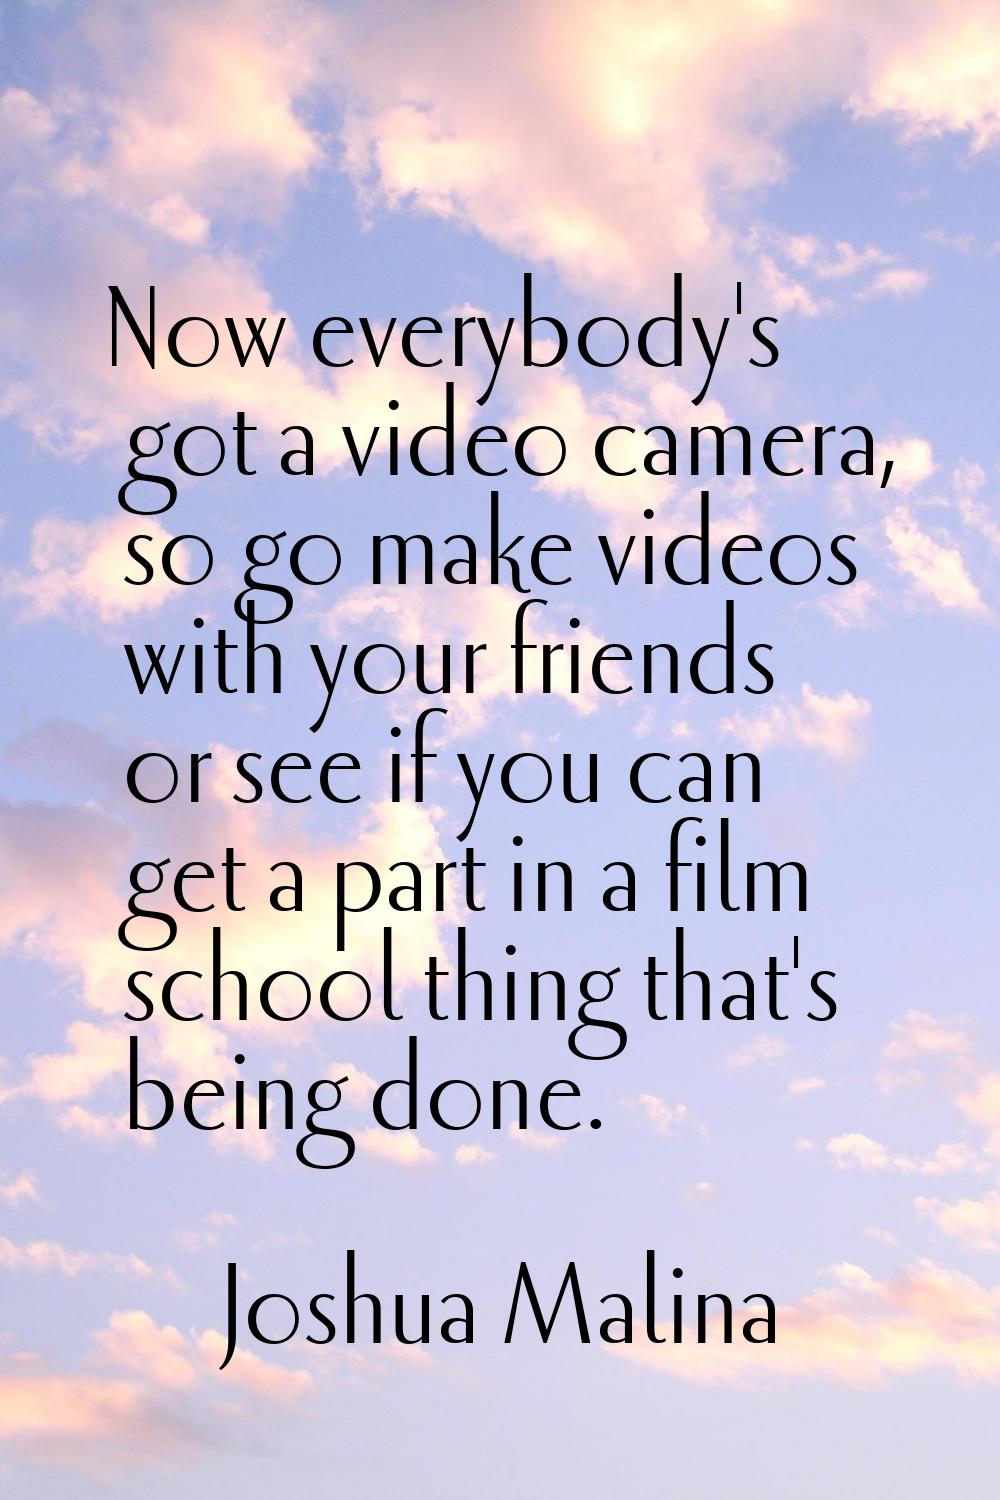 Now everybody's got a video camera, so go make videos with your friends or see if you can get a par